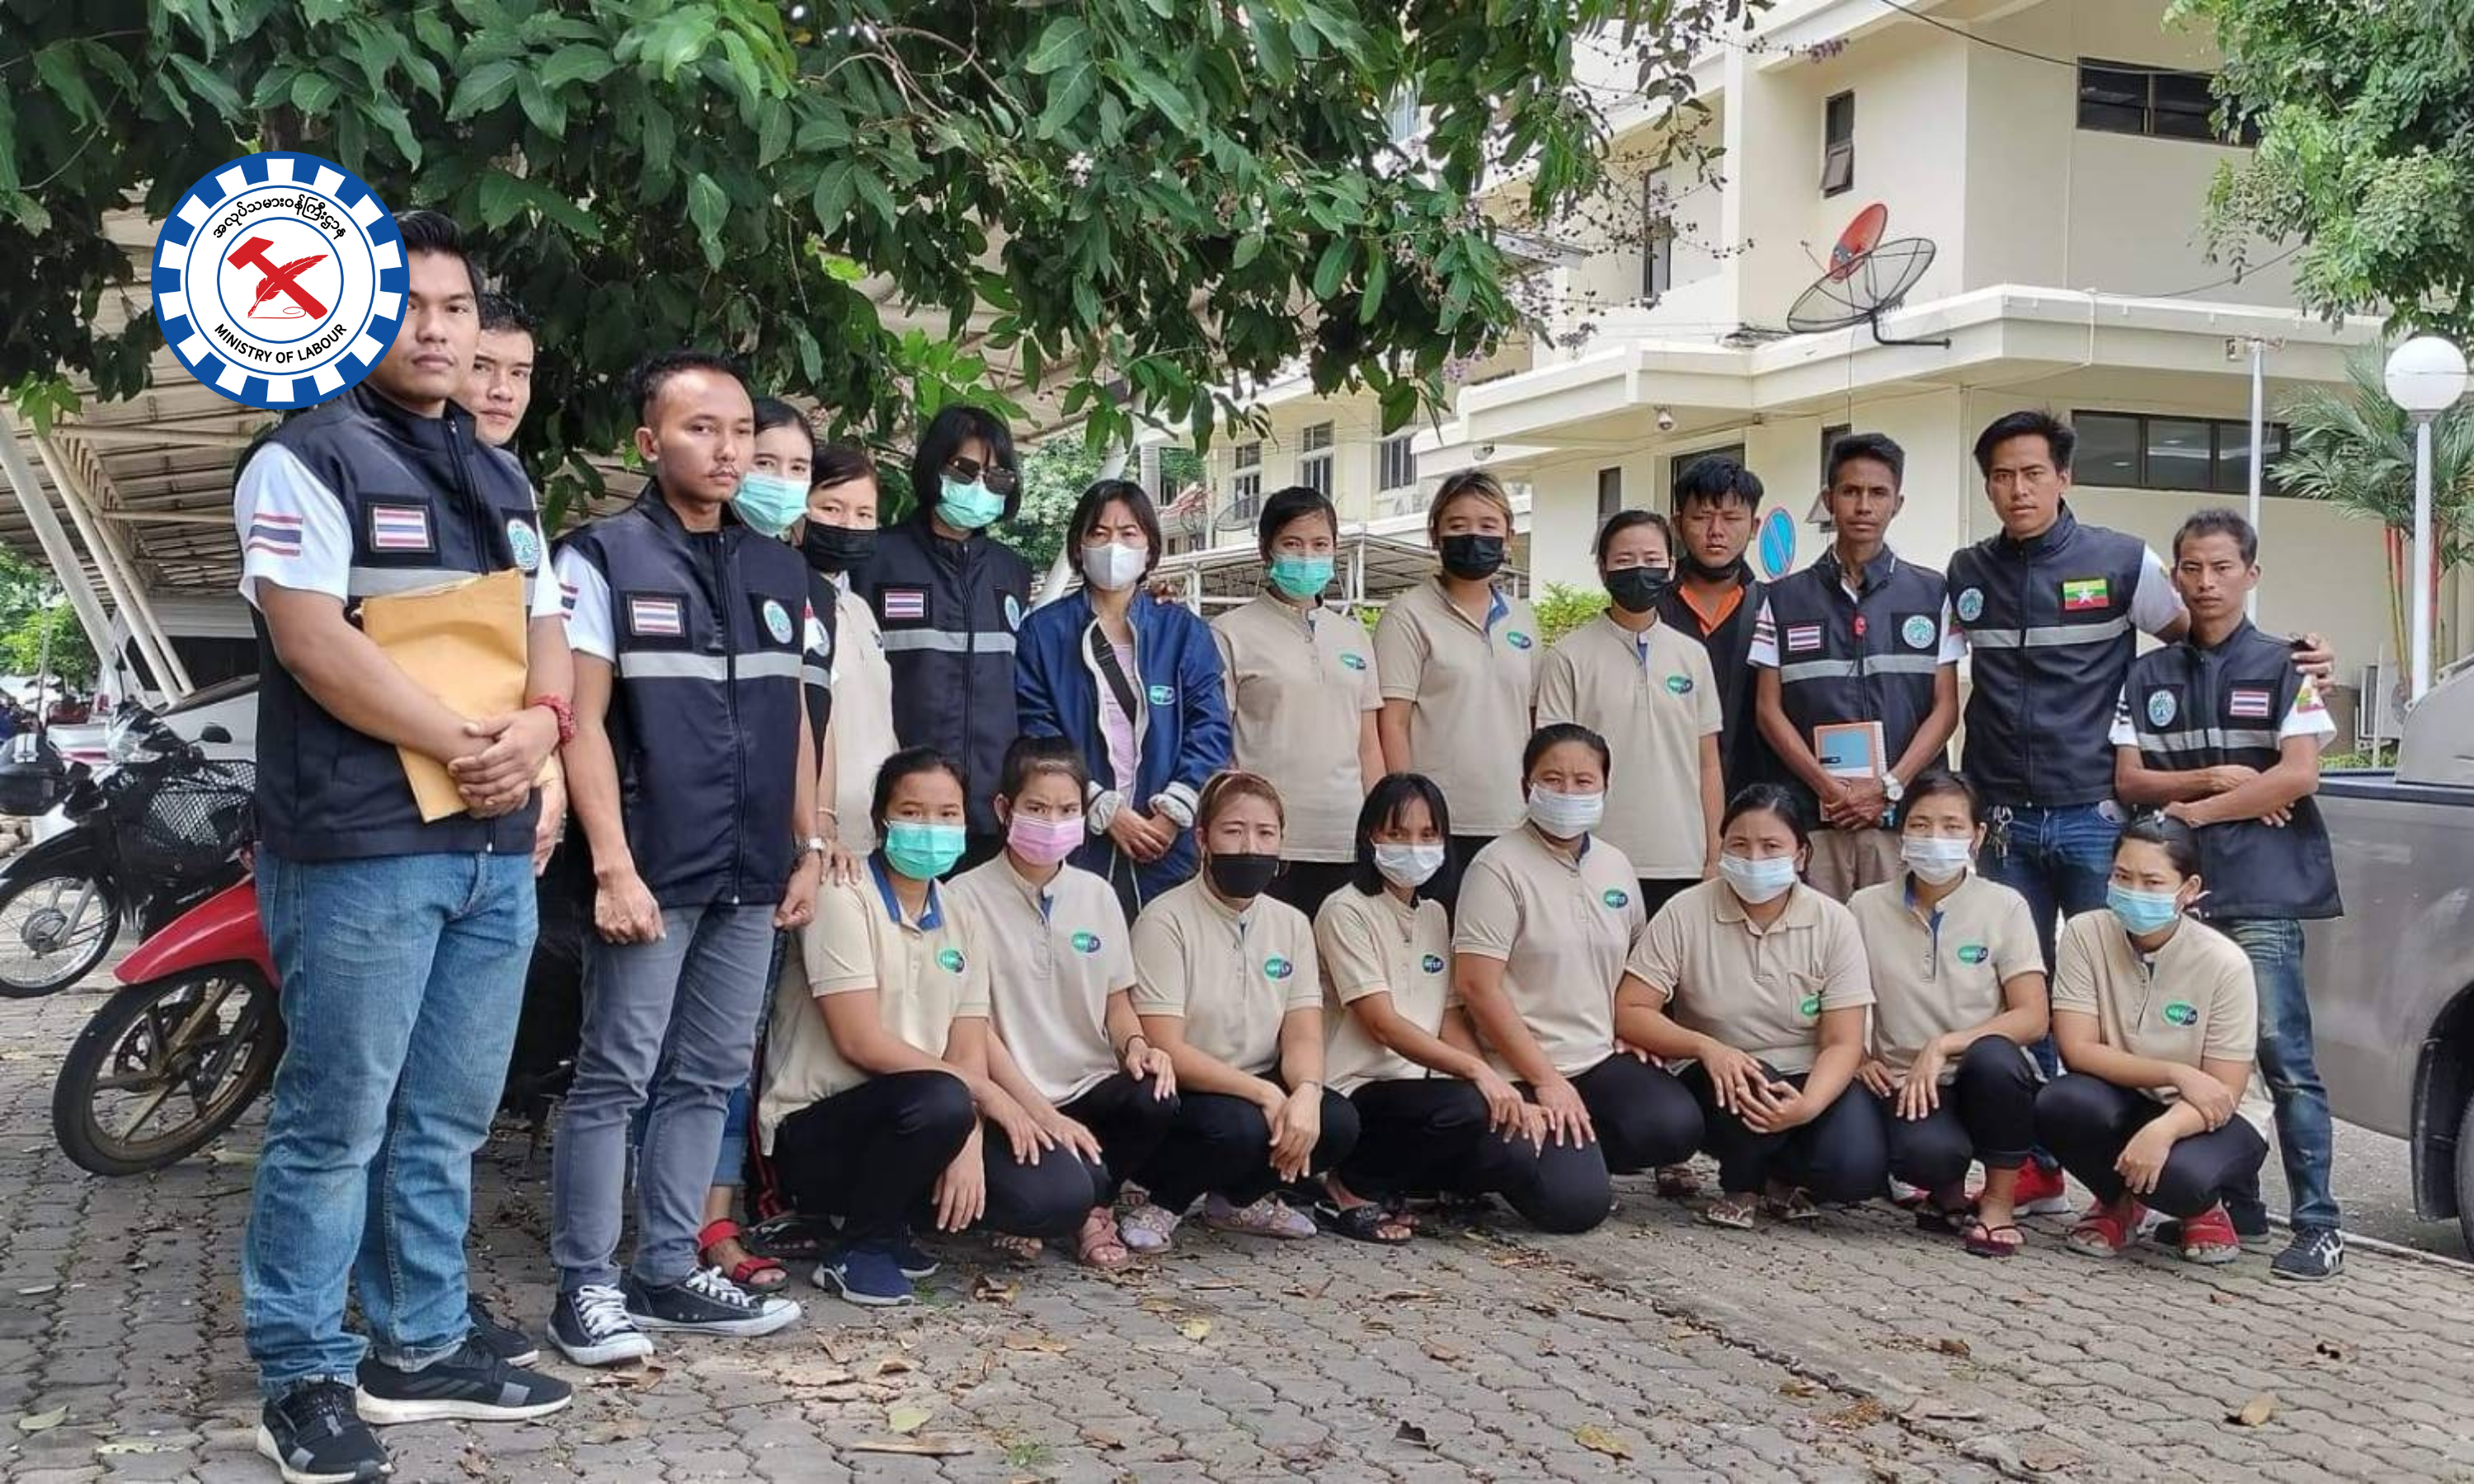 Ministry of Labour https://mol.nugmyanmar.org/news/the-national-unity-government-is-working-hard-to-provide-protection-to-myanmar-workers-in-thailand/